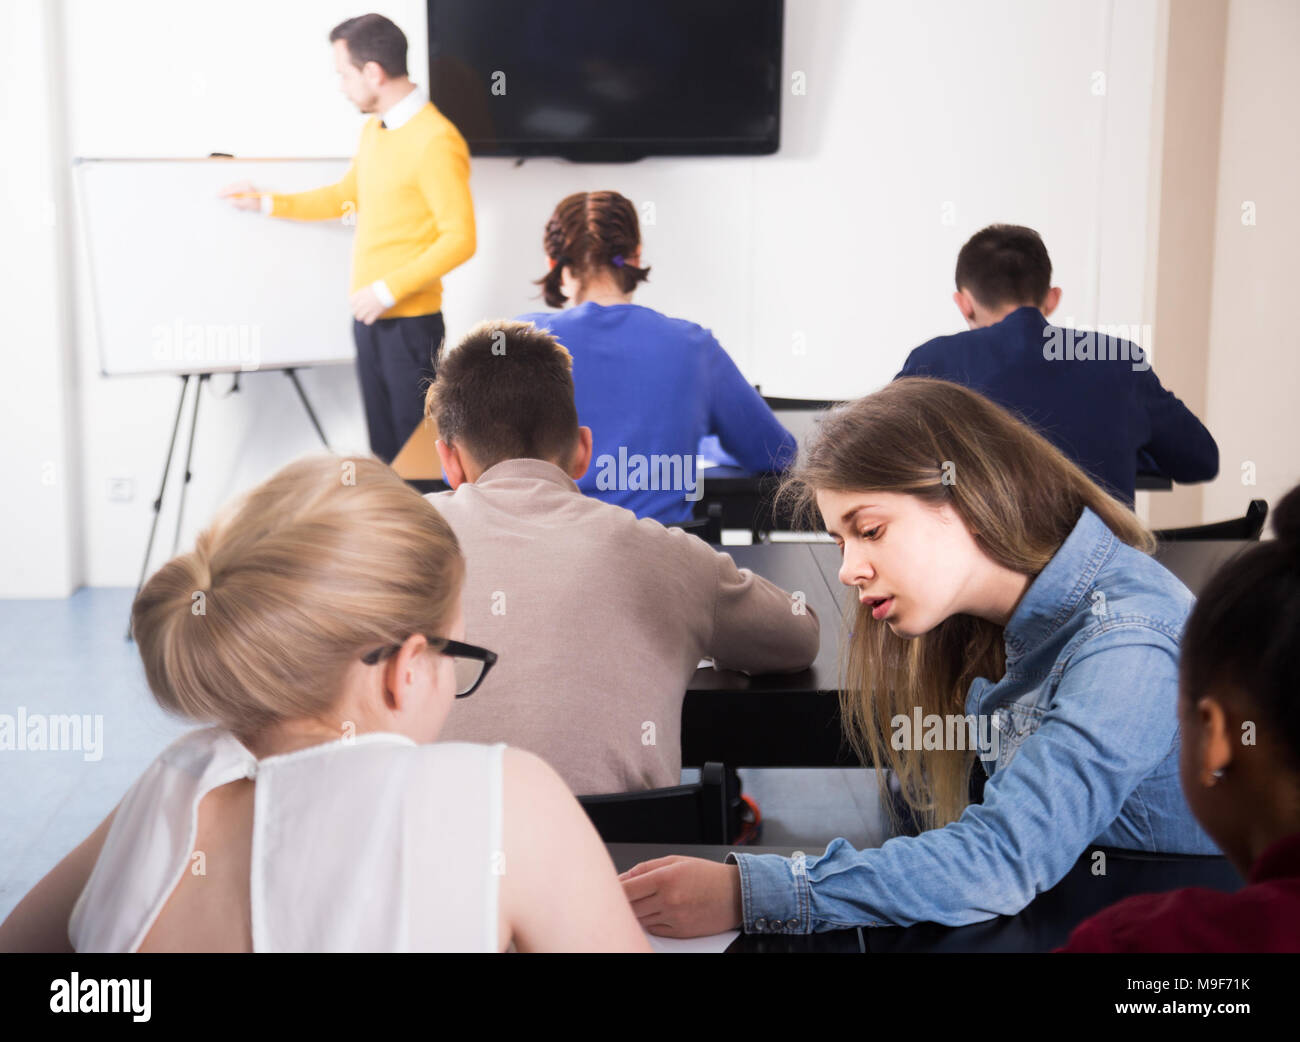 Female student is cheating on and looking test answers in her neighbor’s work. Stock Photo